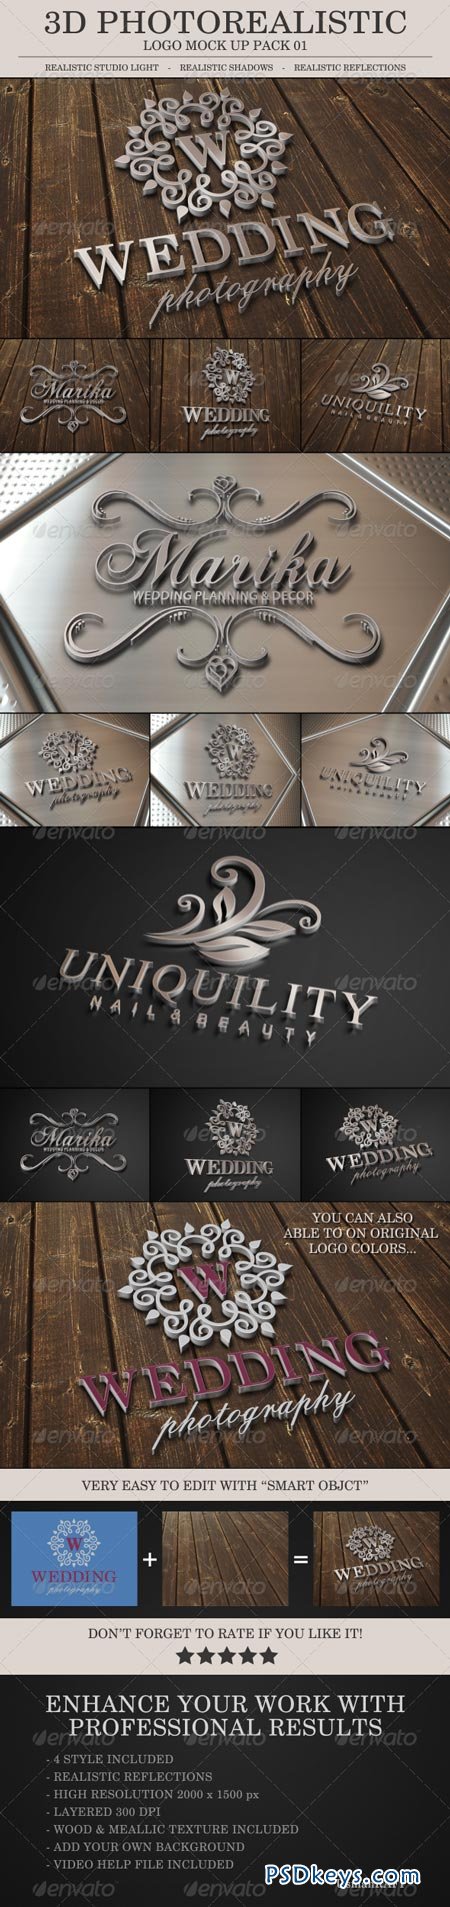 3D Photo Realistic Logo Mock Up Pack 01 3828449